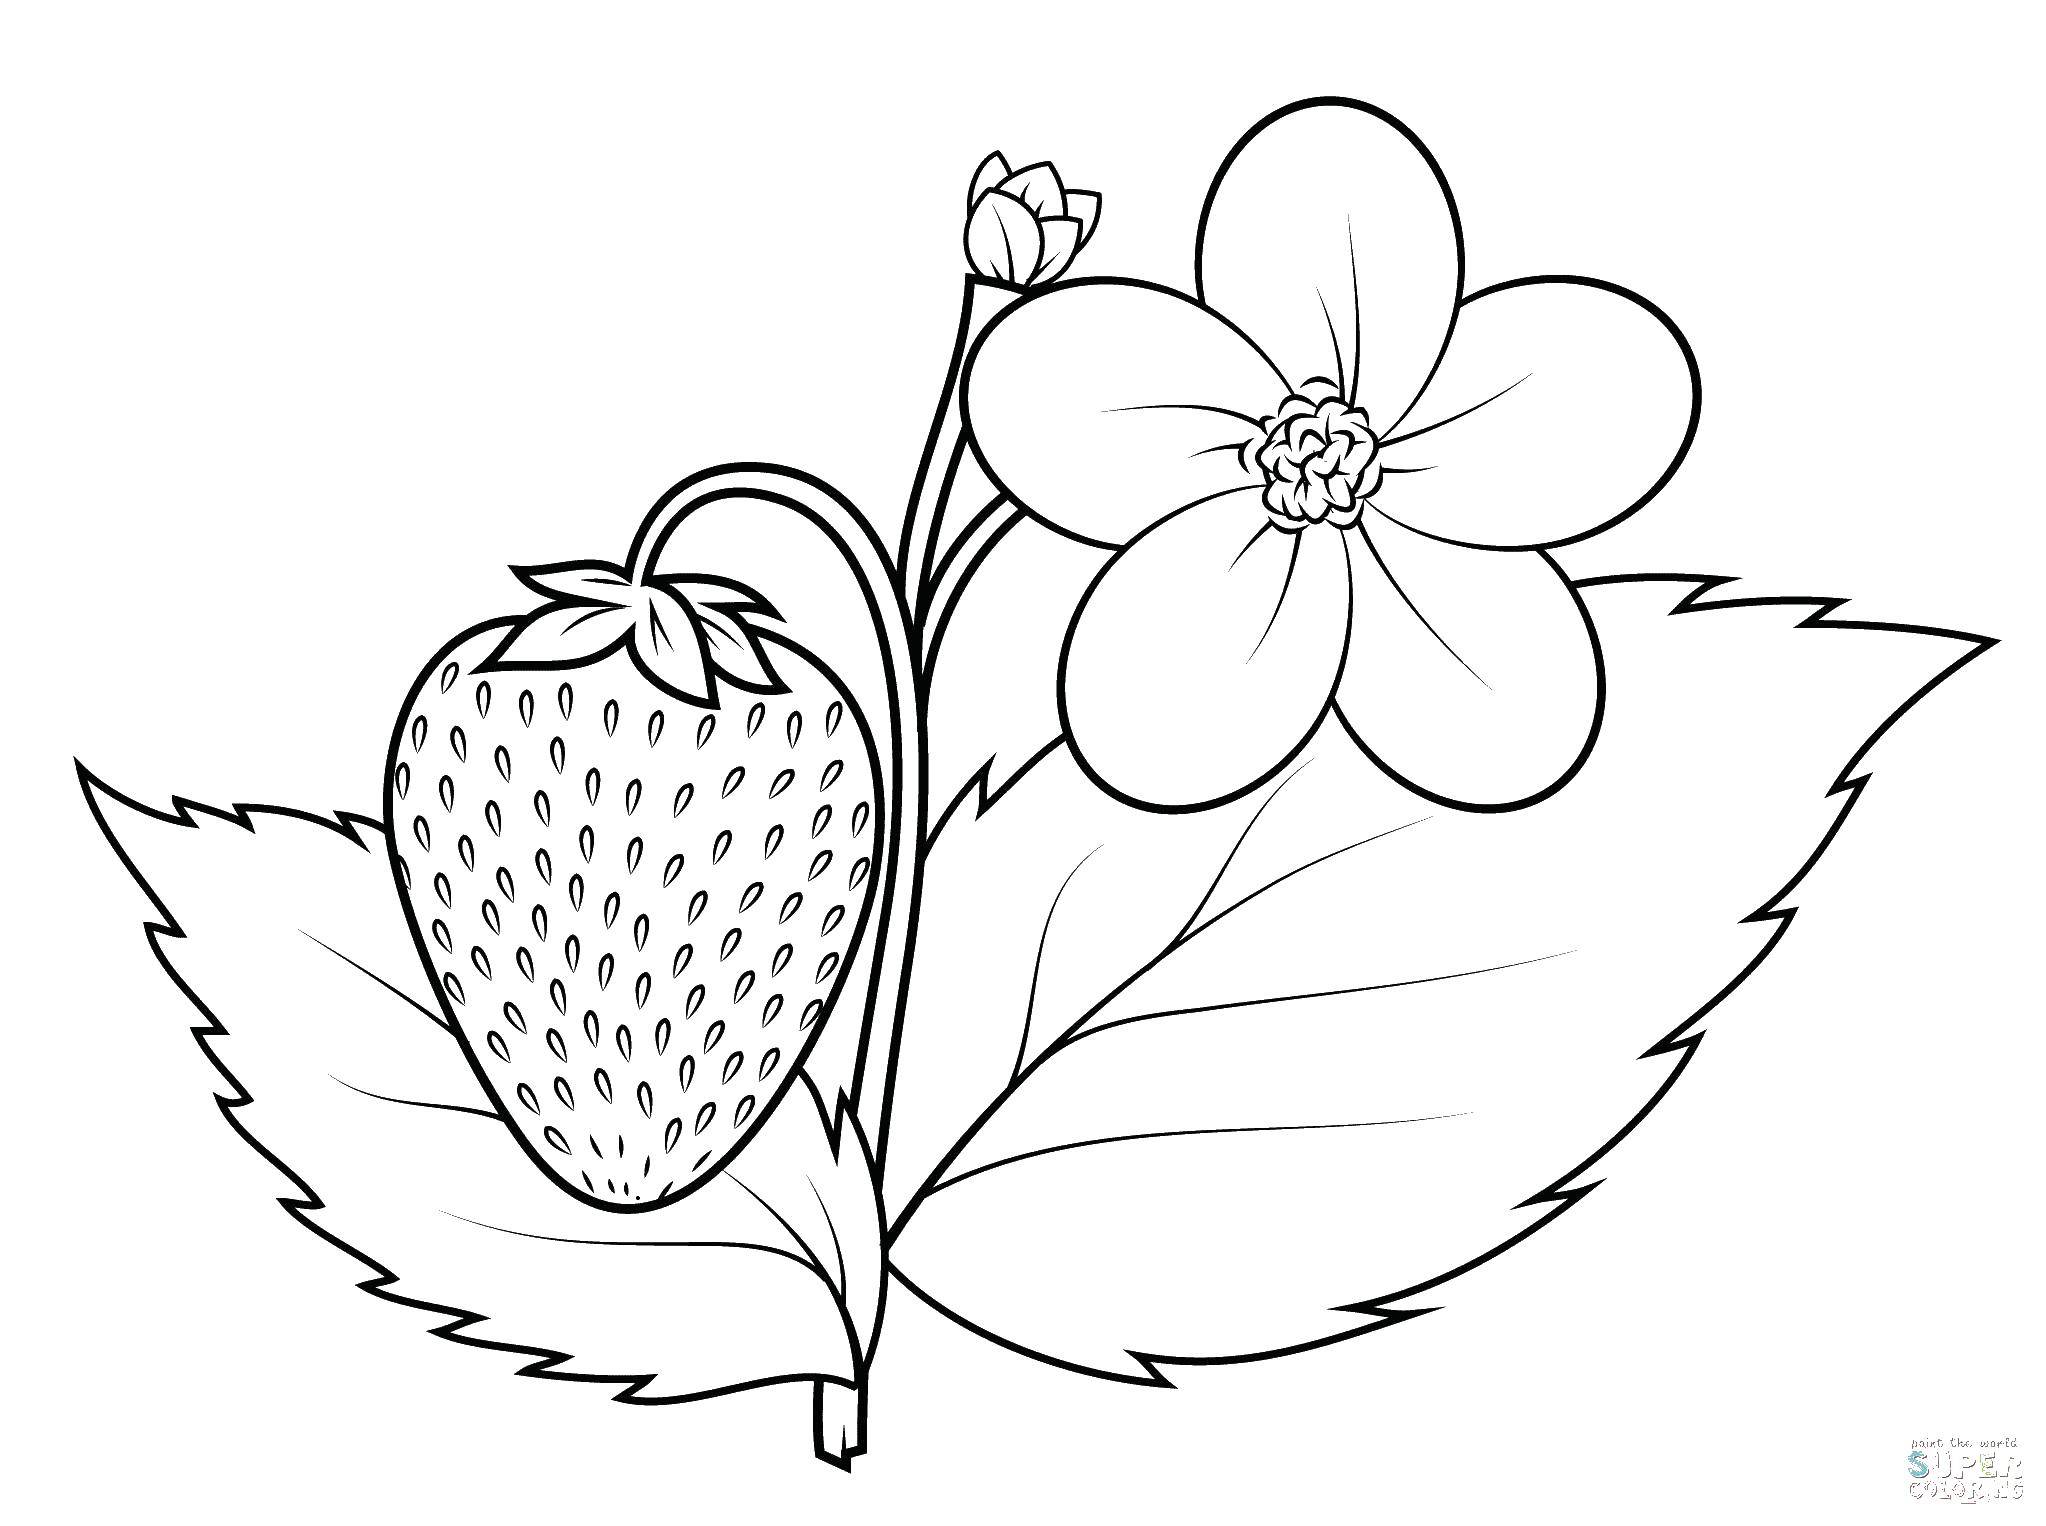 Coloring Bush of strawberry. Category plants. Tags:  plants, berries, strawberries.